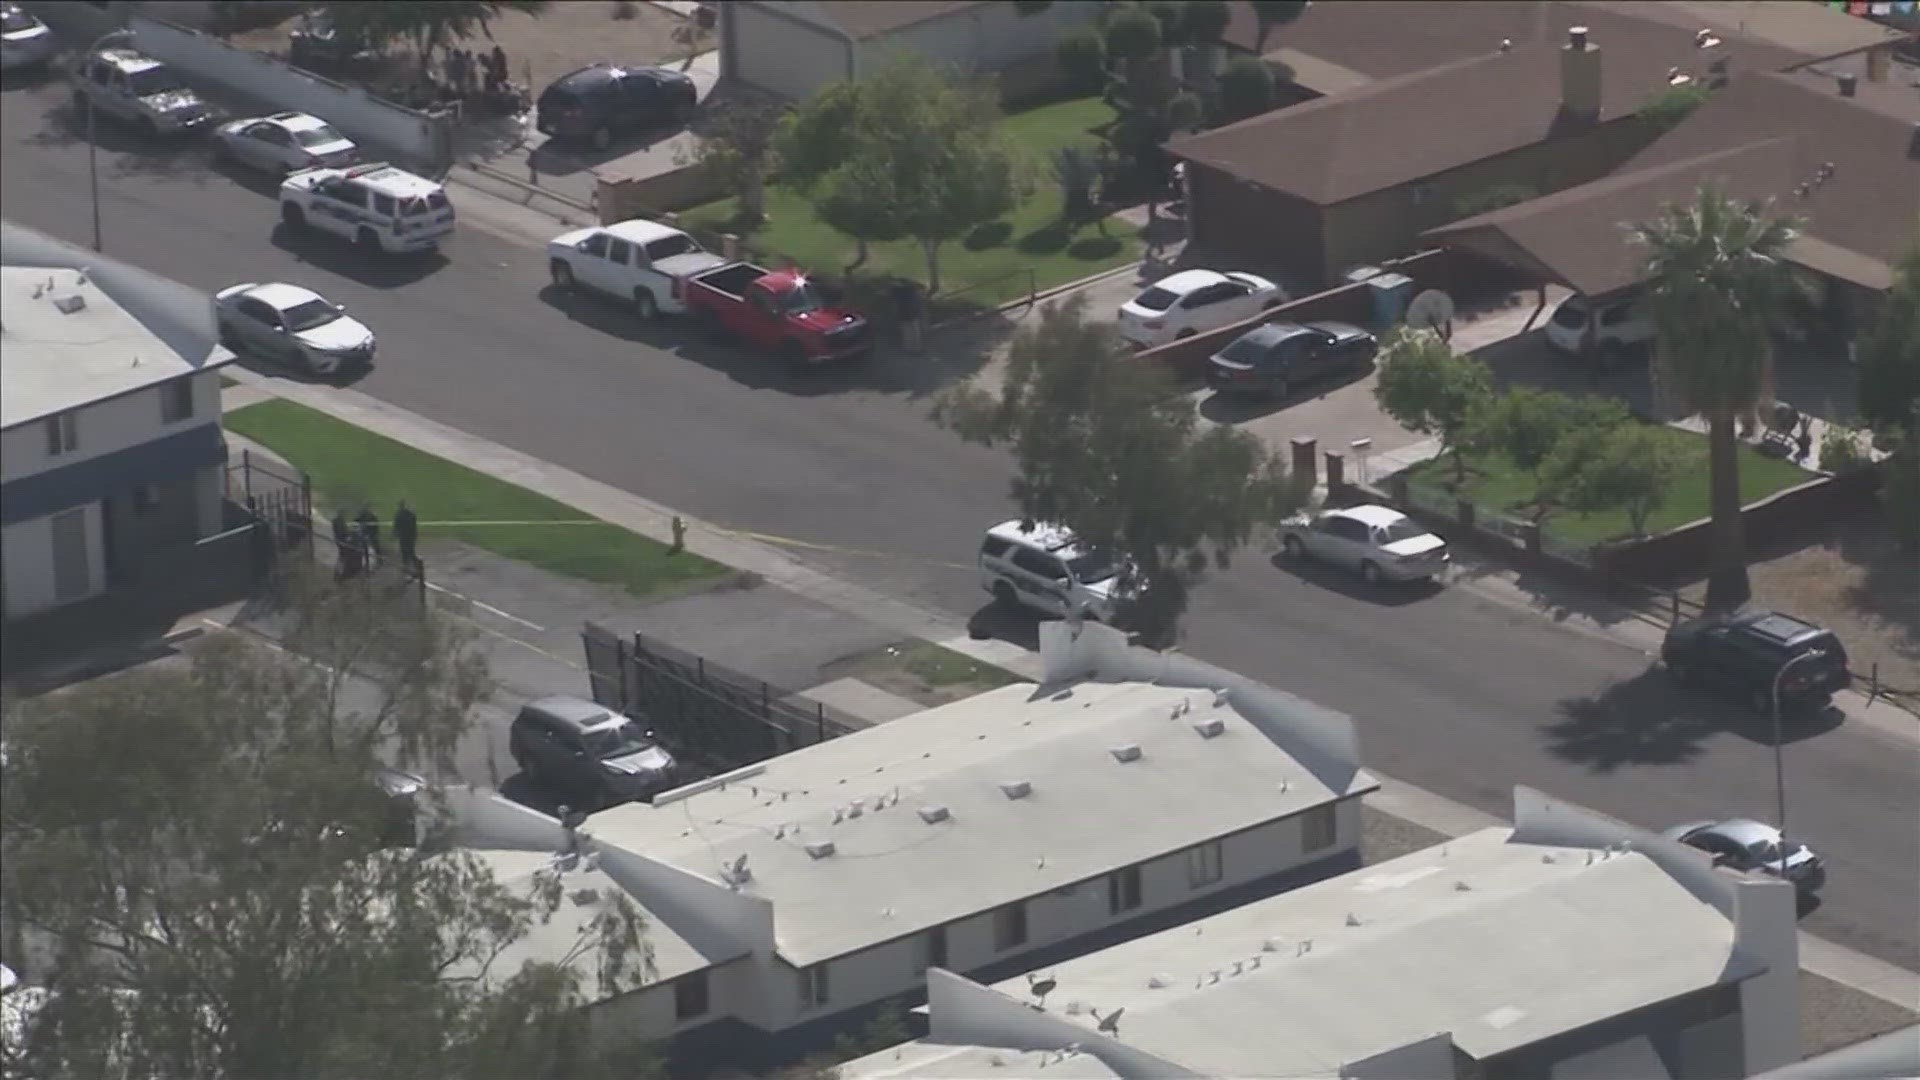 One person is dead after three people were shot Monday afternoon near 45th Avenue and Thomas Road in Phoenix, the city's police department said.